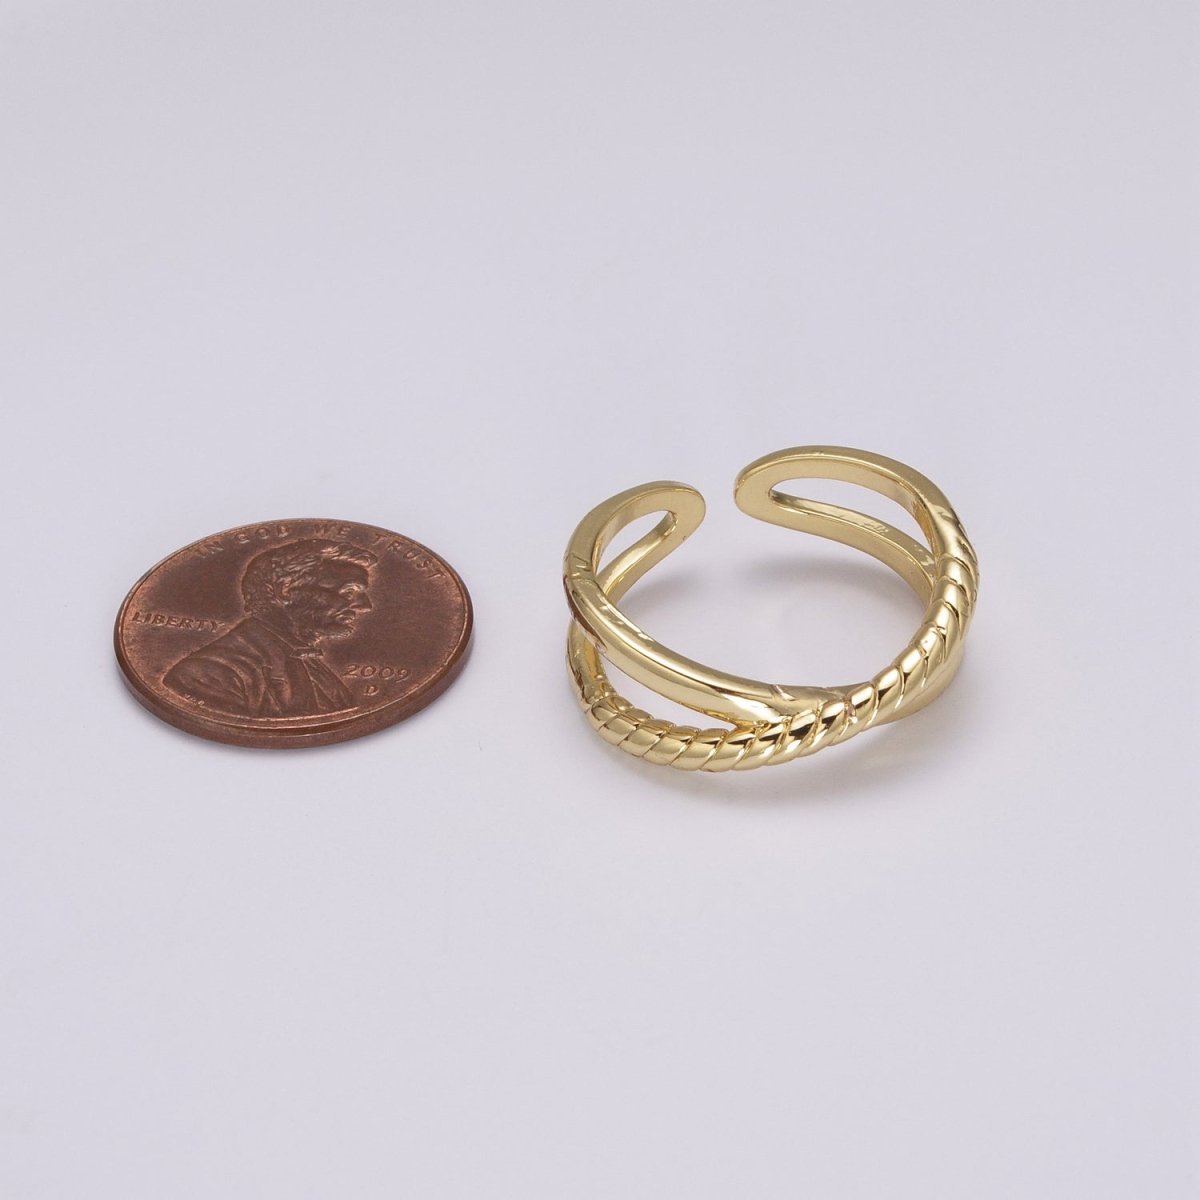 Minimalist Dainty Crossed X Twisted Rope Double Band Adjustable Gold Ring U-125 - DLUXCA